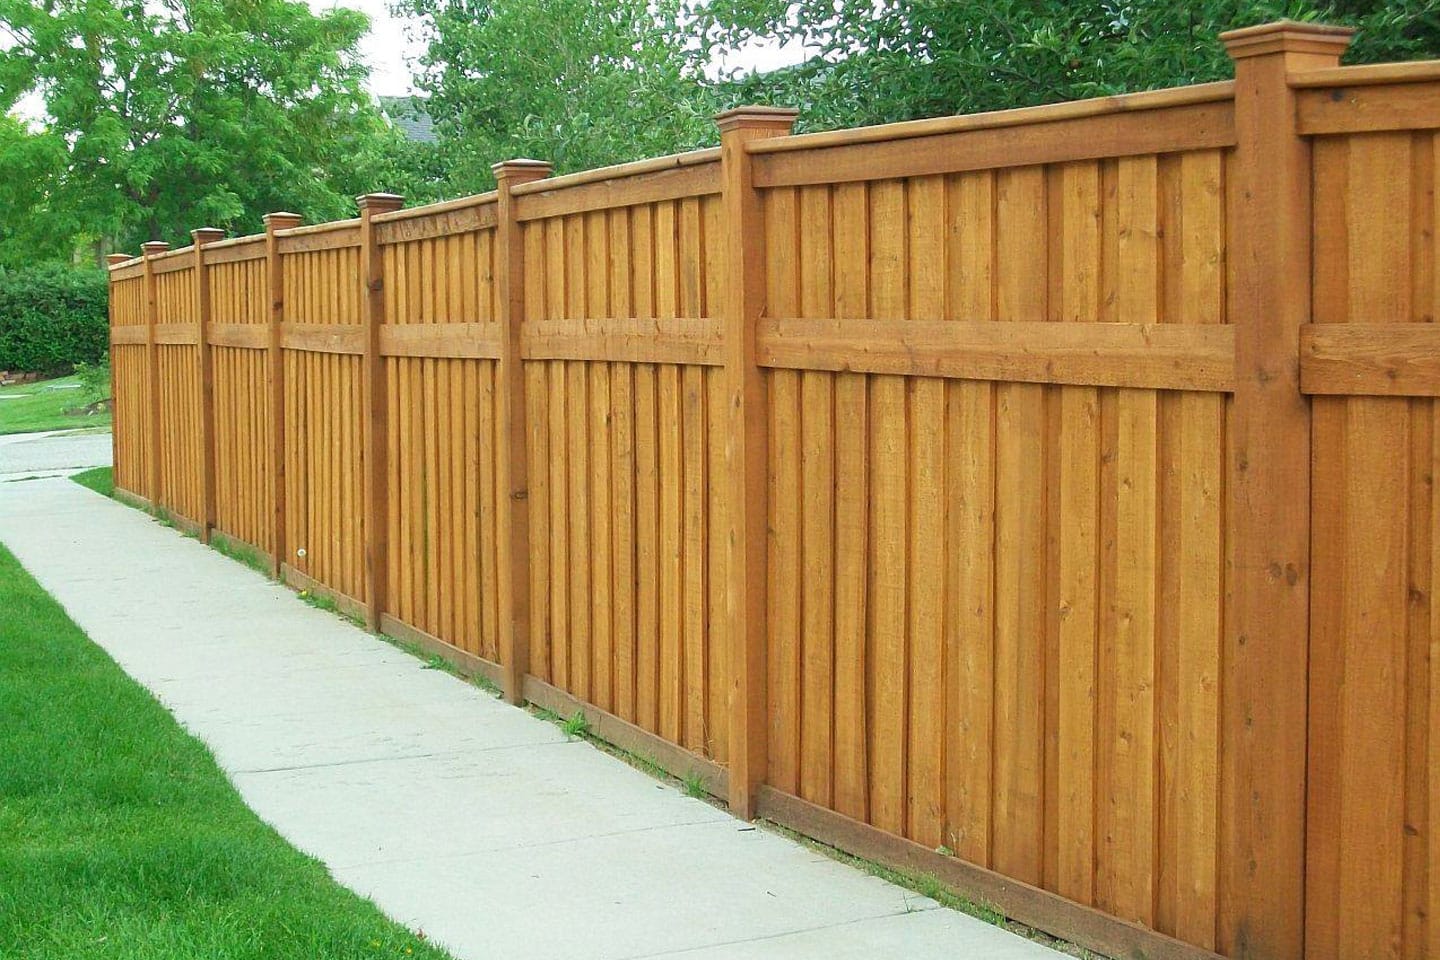 5 tips for pressure washing fences